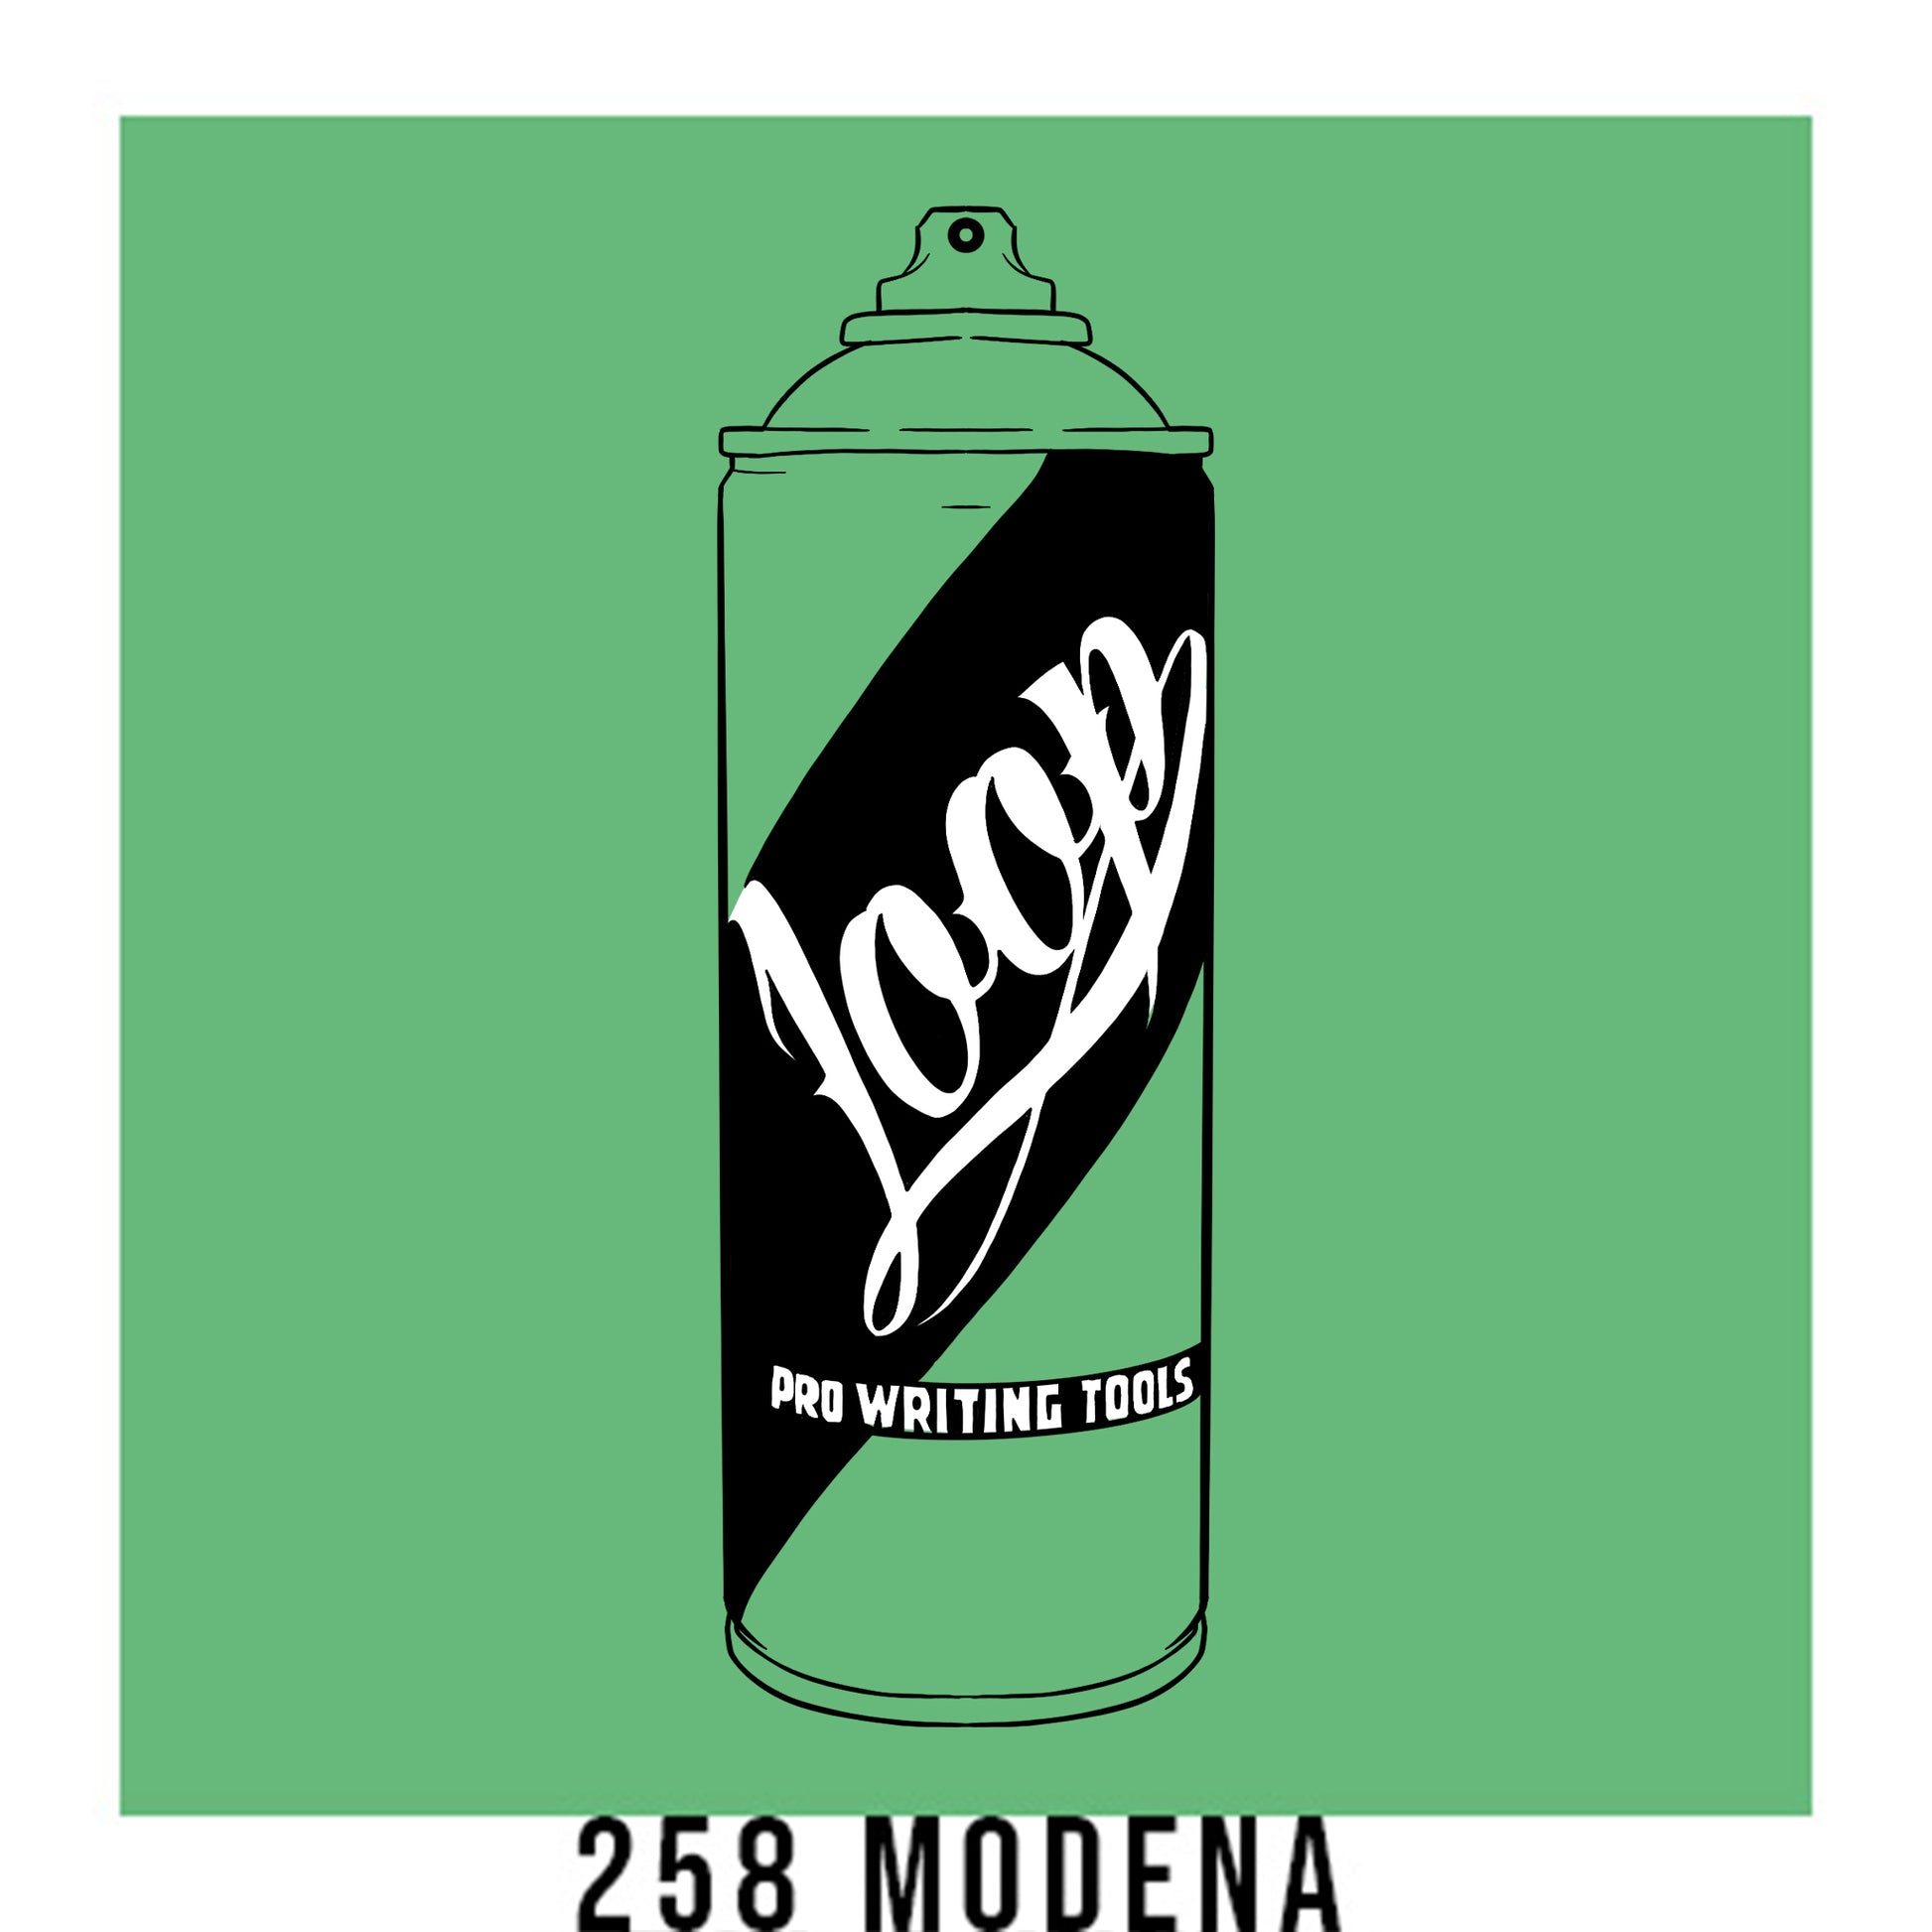 A black outline drawing of a Emerald Green spray paint can with the word "Loop" written on the face in script. The background is a color swatch of the same Emerald Green with a white border with the words "258 Modena" at the bottom.